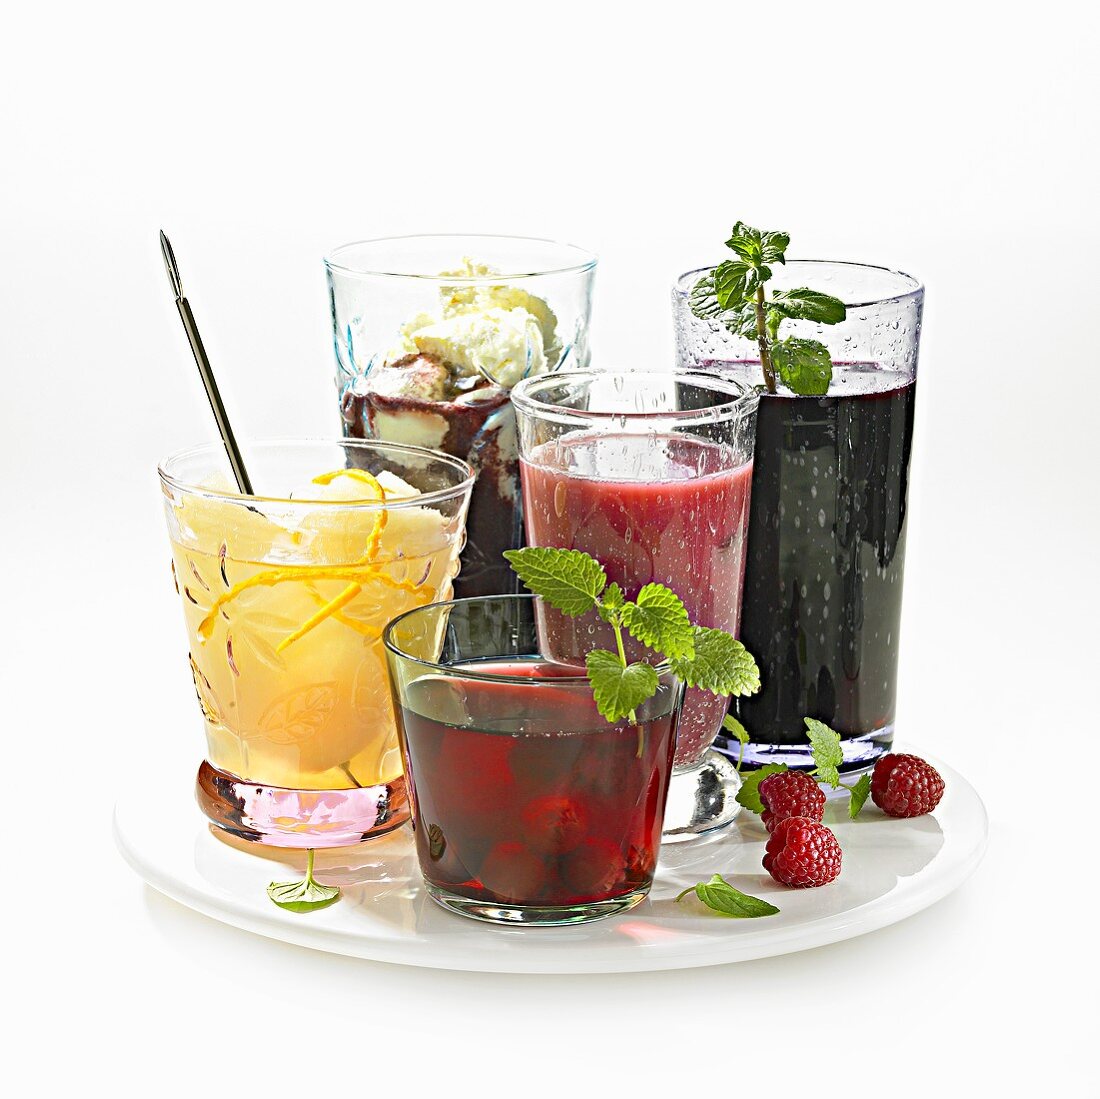 Five different types of compote in glasses